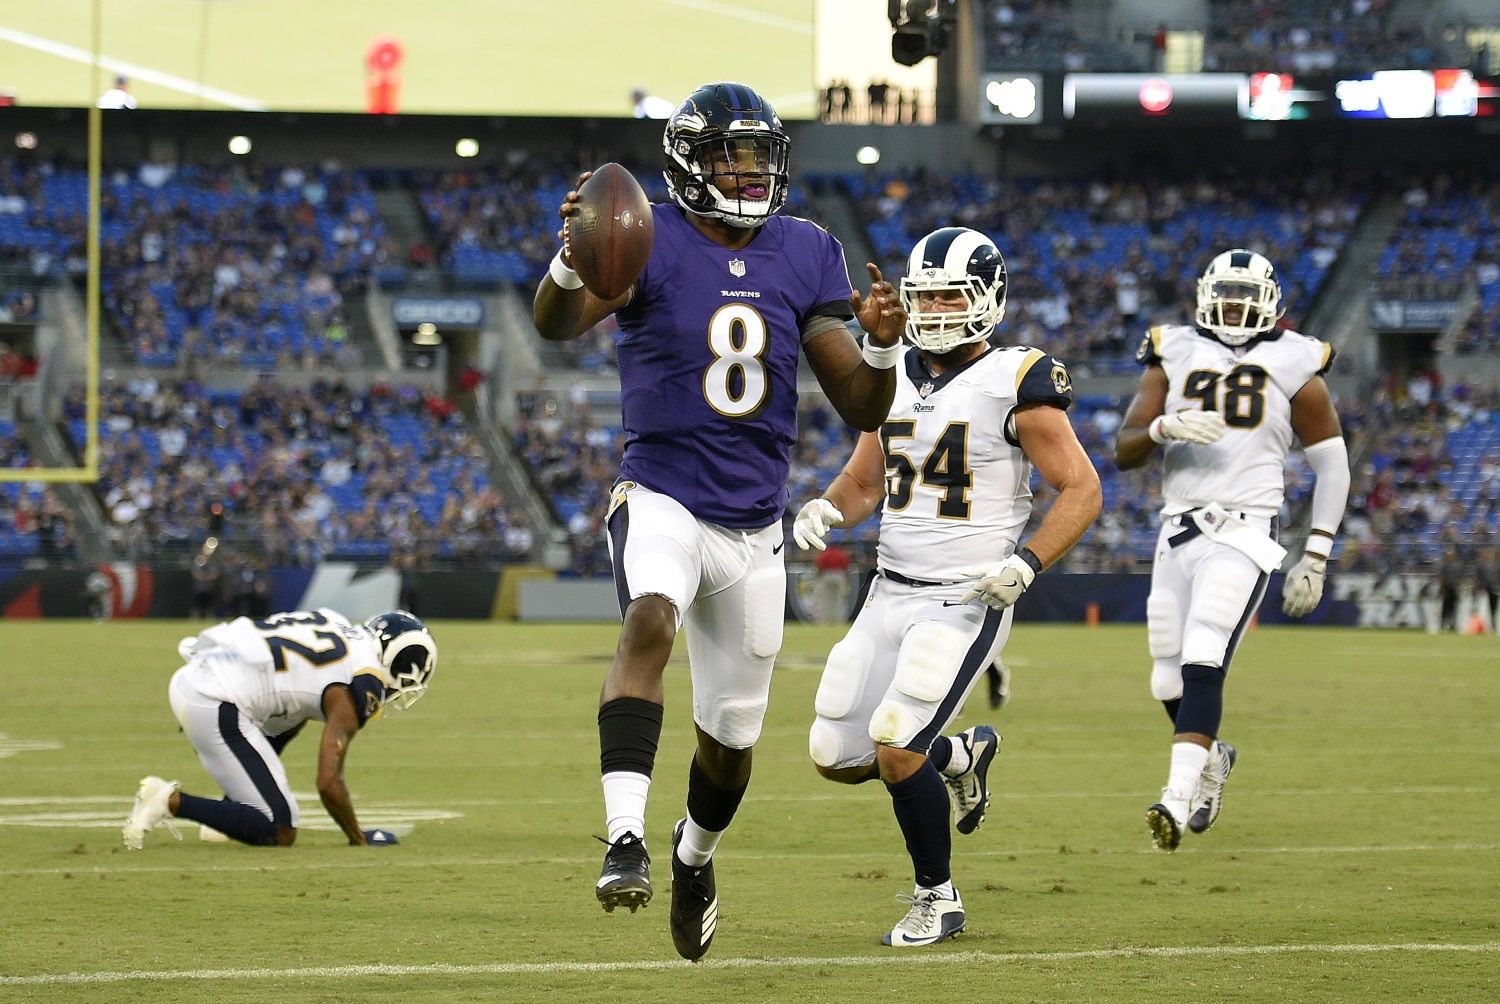 Baltimore Ravens quarterback Lamar Jackson (8) scores a touchdown in the first half of a preseason NFL football game against the Los Angeles Rams, Thursday, Aug. 9, 2018, in Baltimore. (AP Photo/Nick Wass)